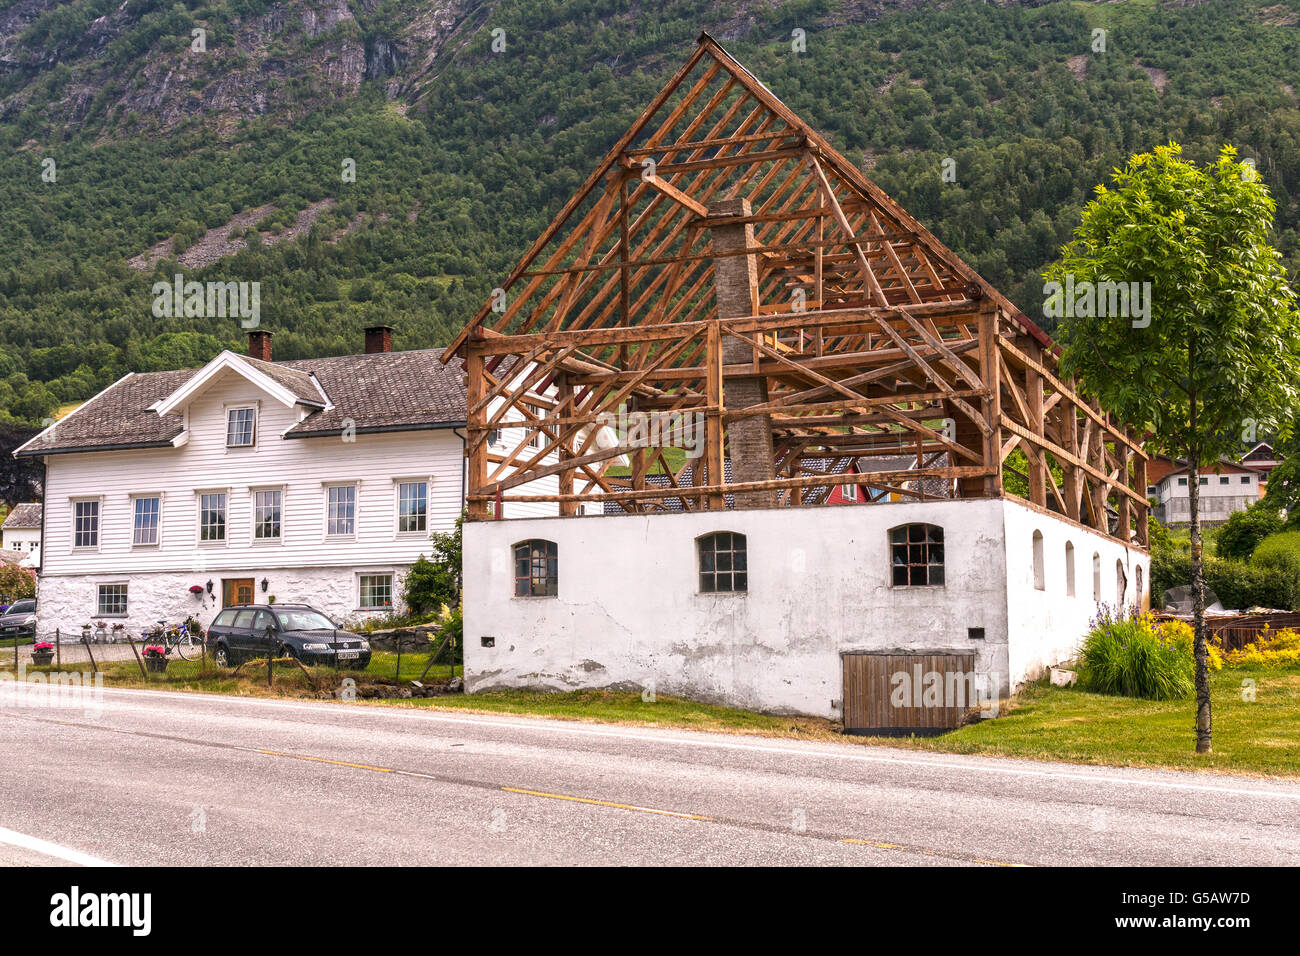 Norwegian farming. The wooden construction of a common barn, Olden, Norway. Droppings pit, cowshed and hay loft in one. Stock Photo